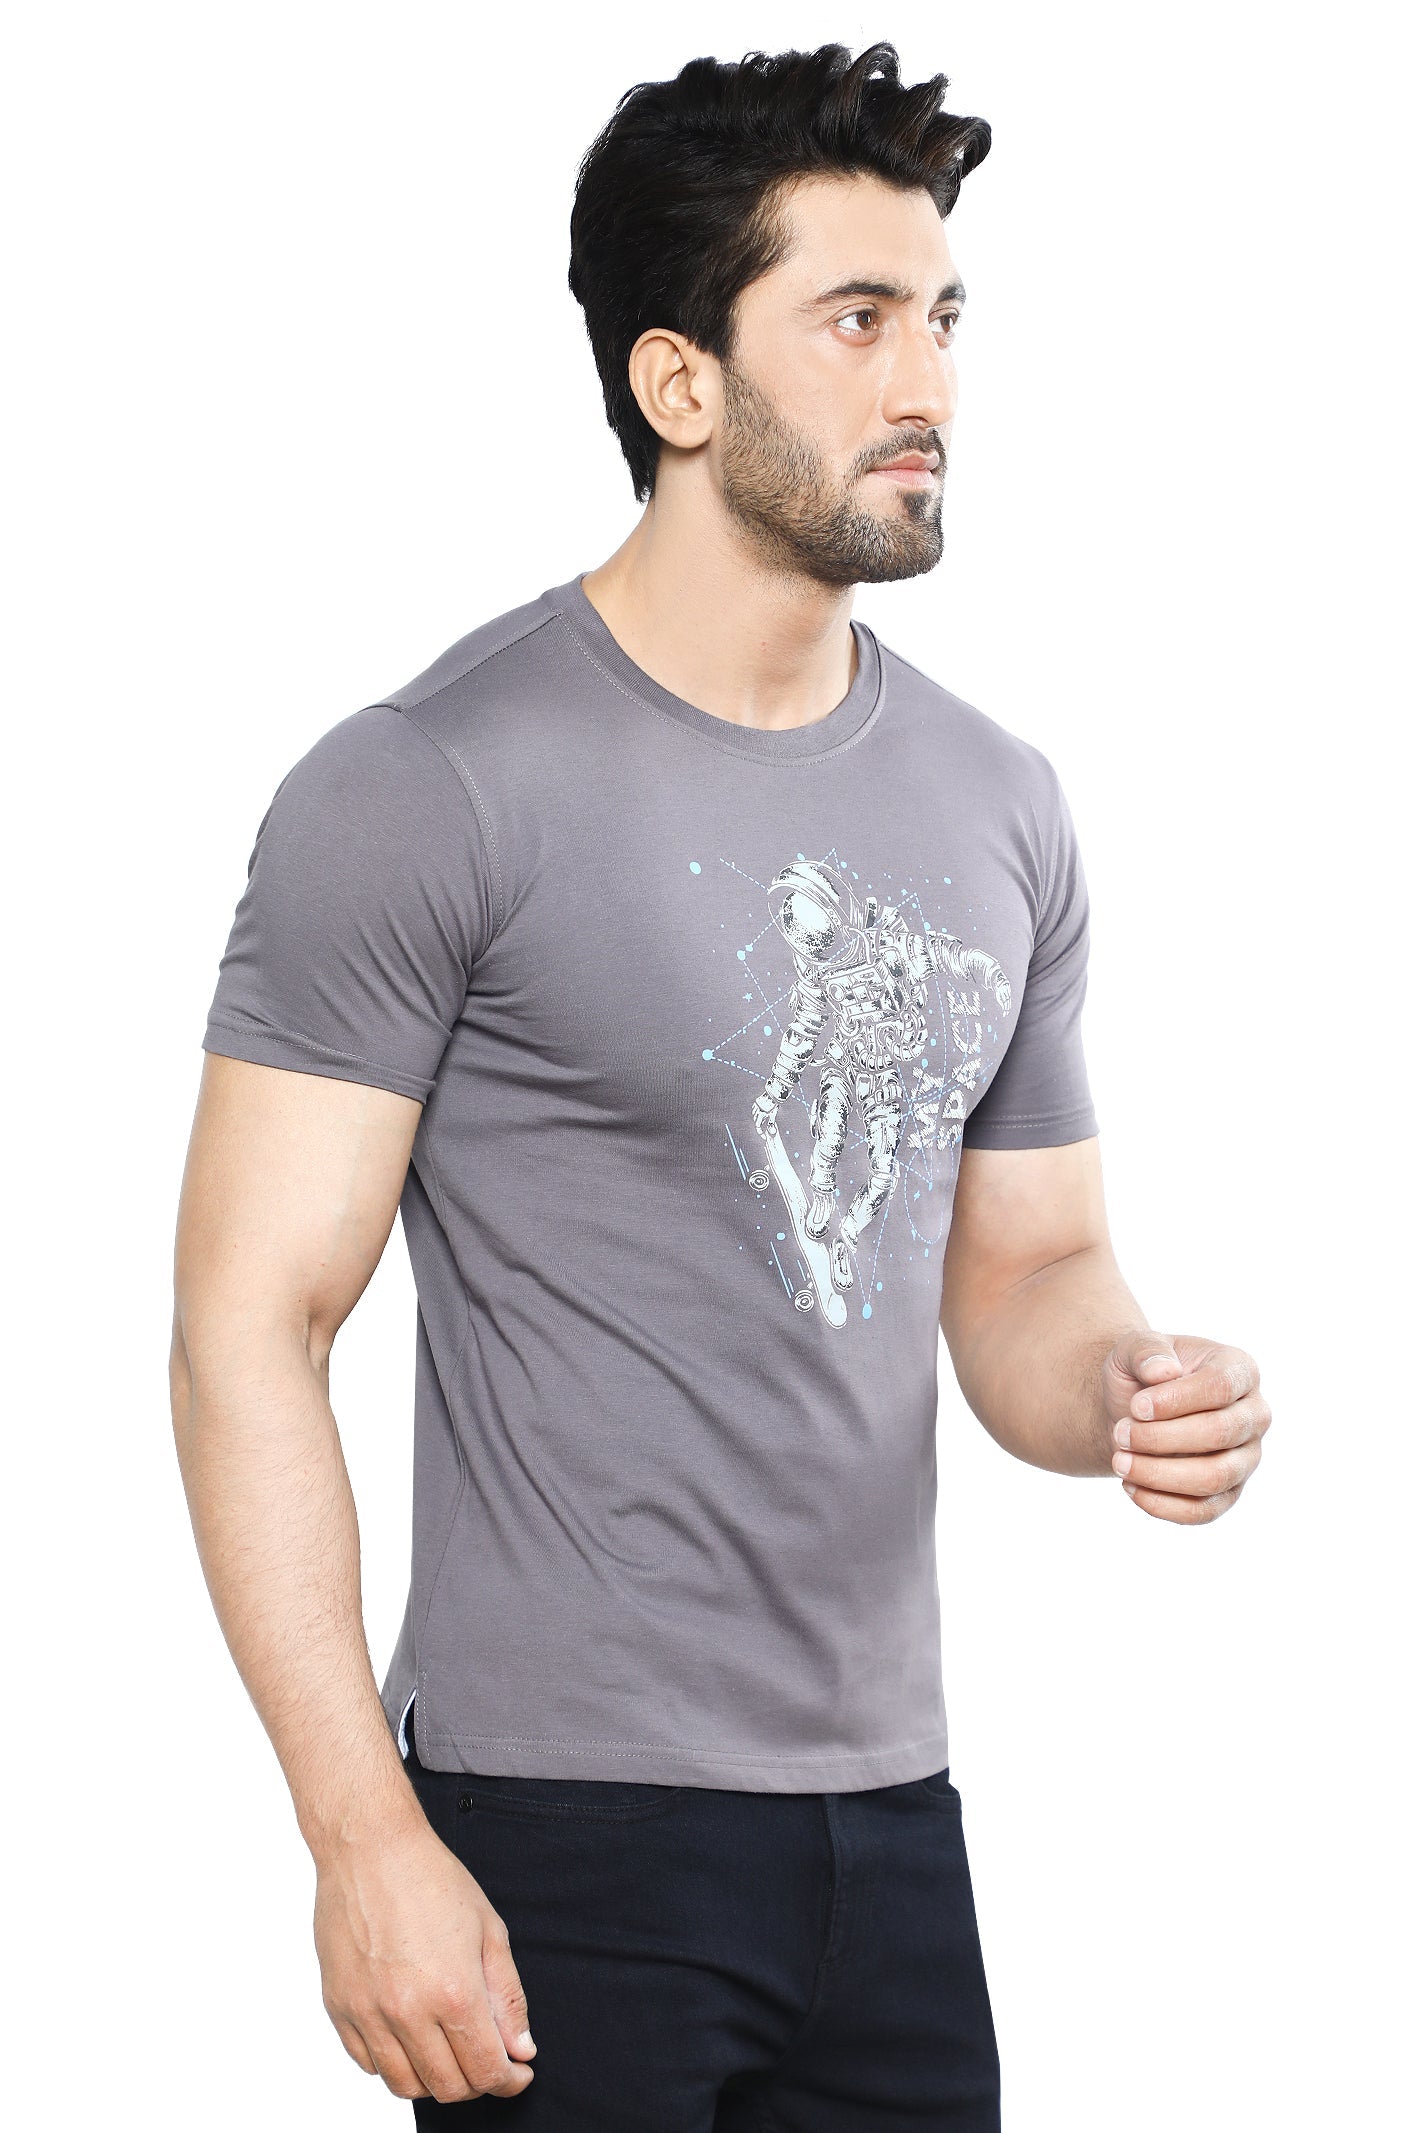 Diners Men's Round Neck T-Shirt SKU: NA824-GREY - Diners